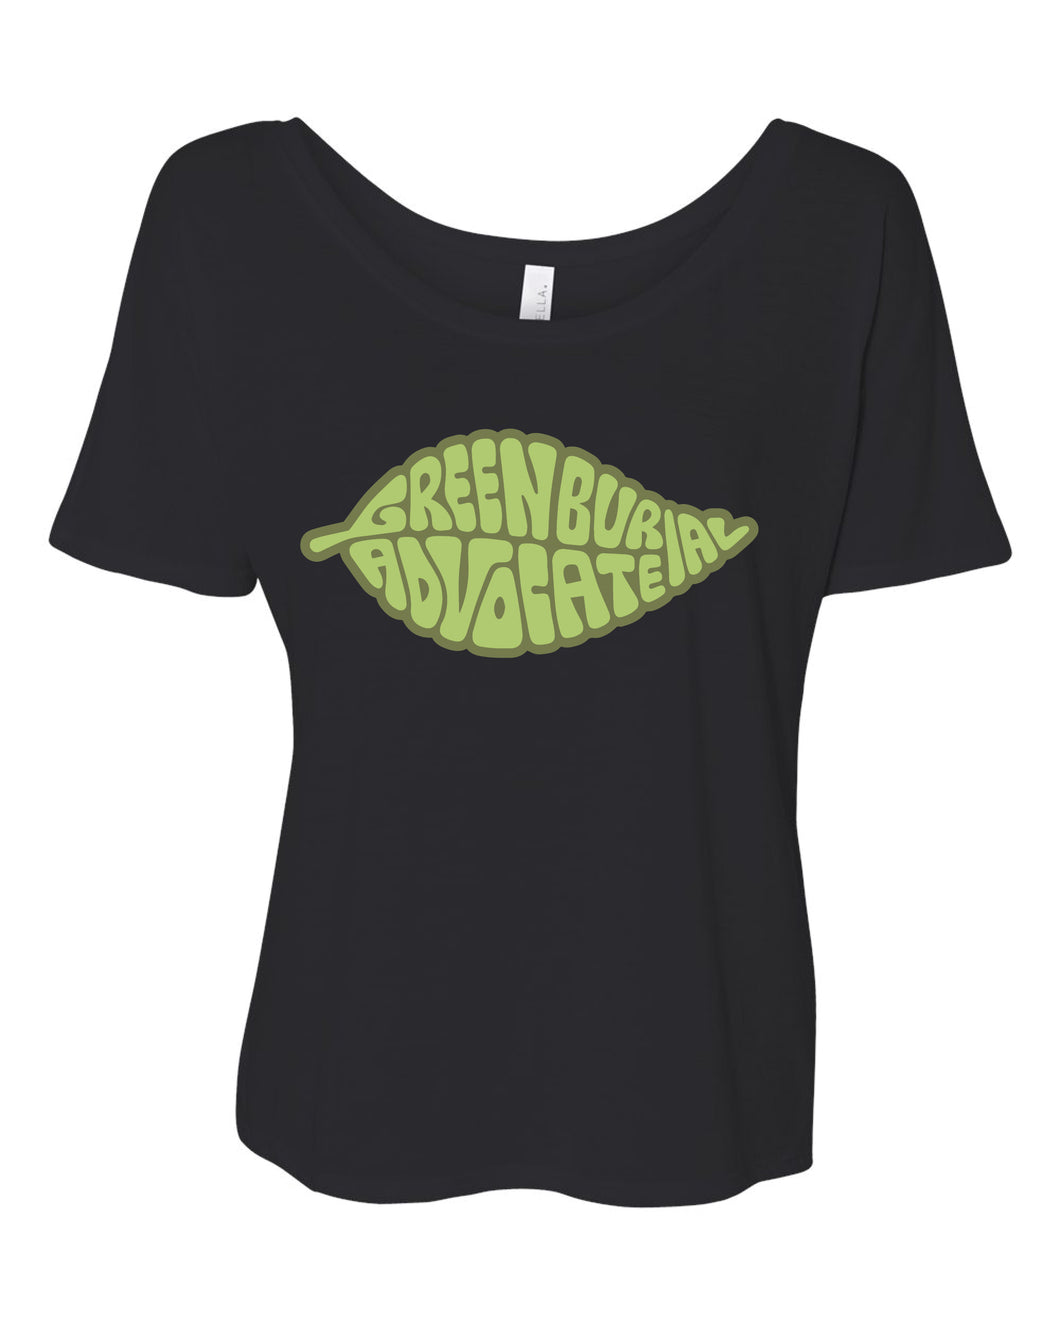 Green Burial Advocate Slouchy Top